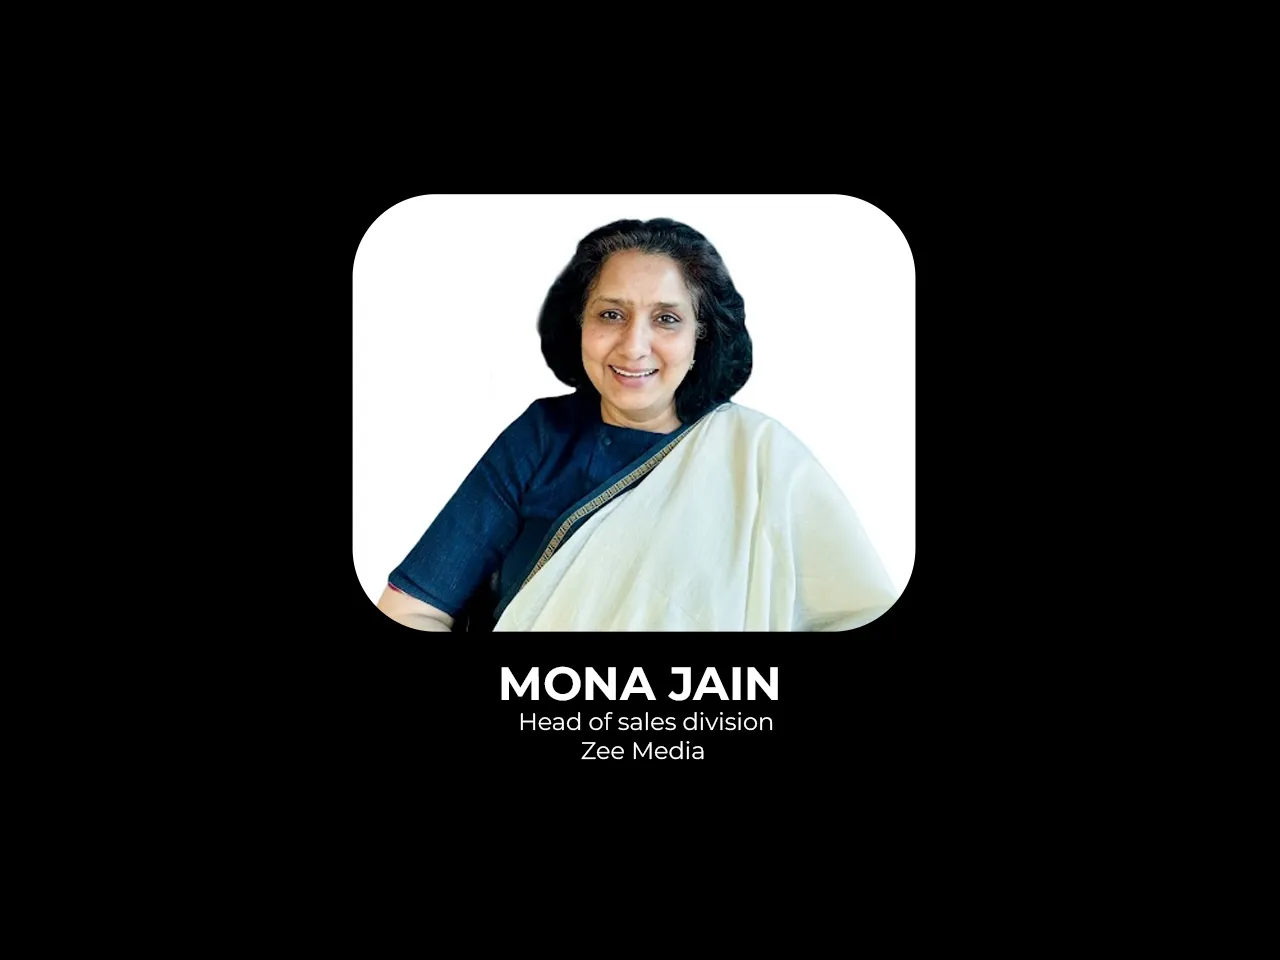 Mona Jain to lead unified sales division at Zee Media